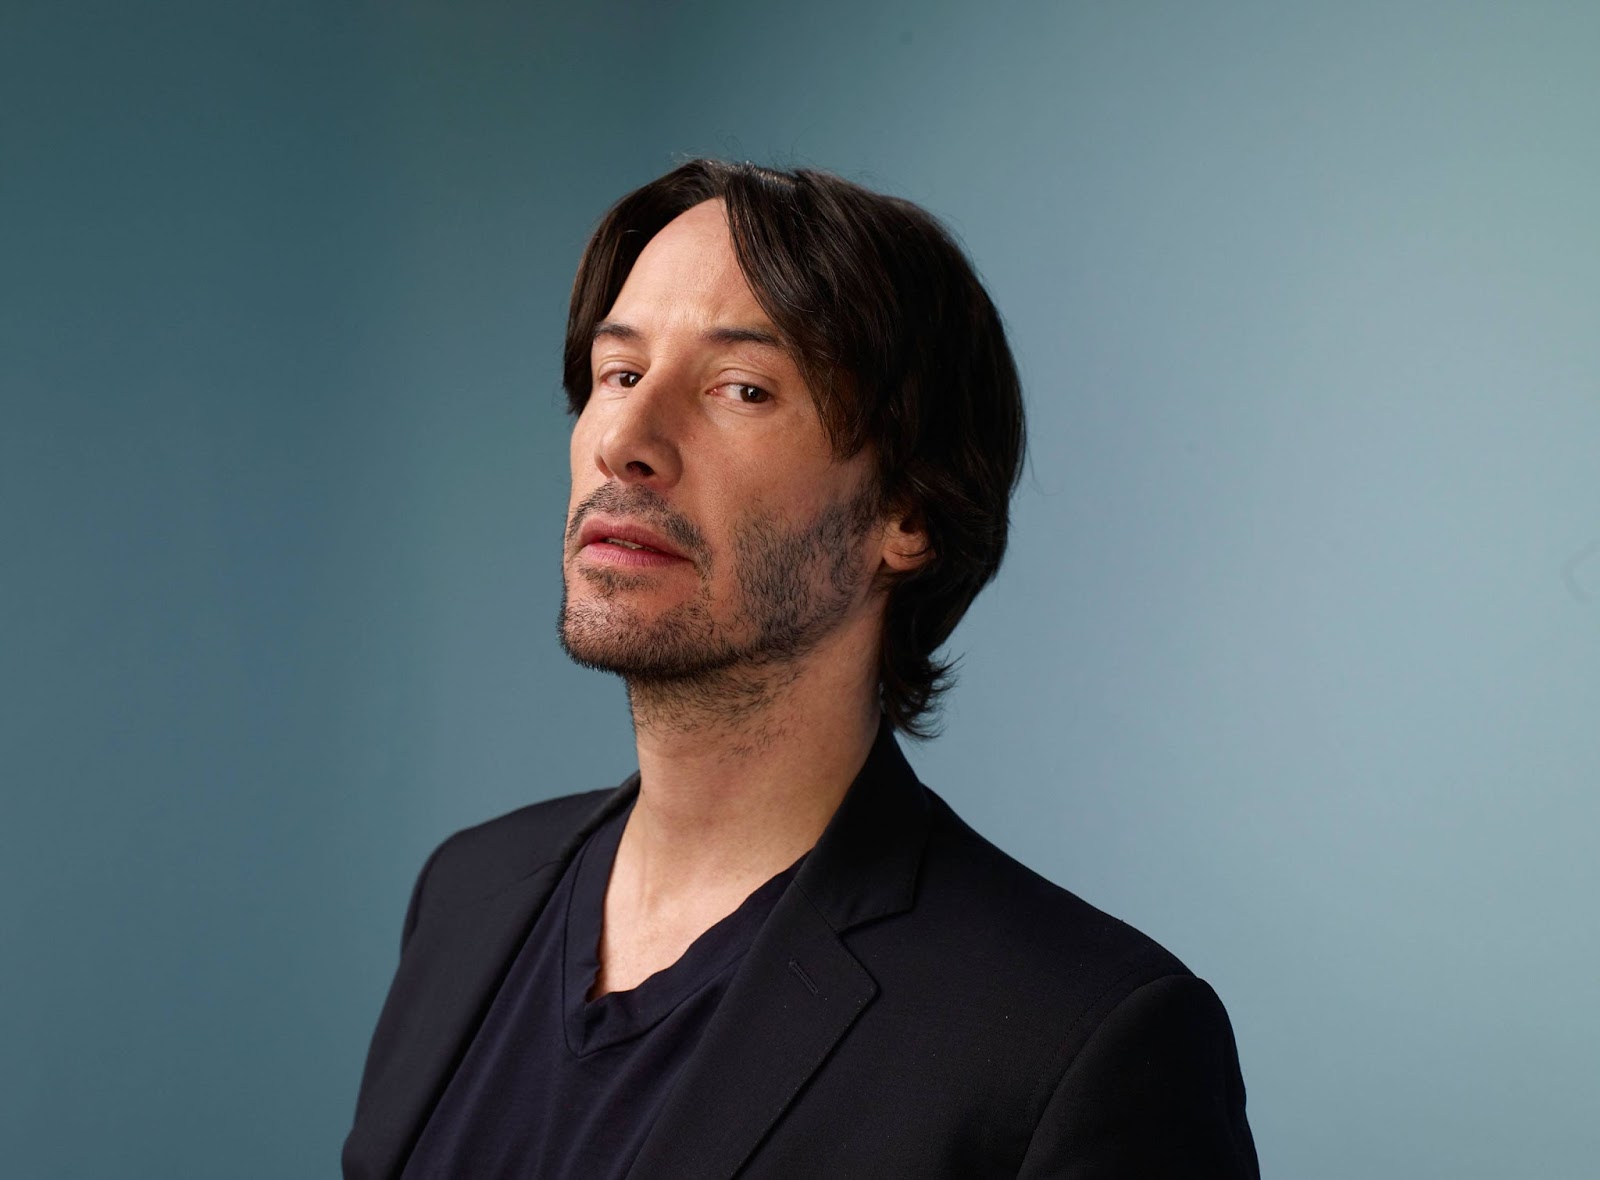 Keanu Reeves Hollywood Actor HD Wallpaper | HD Wallpapers (High Definition ...1600 x 1180